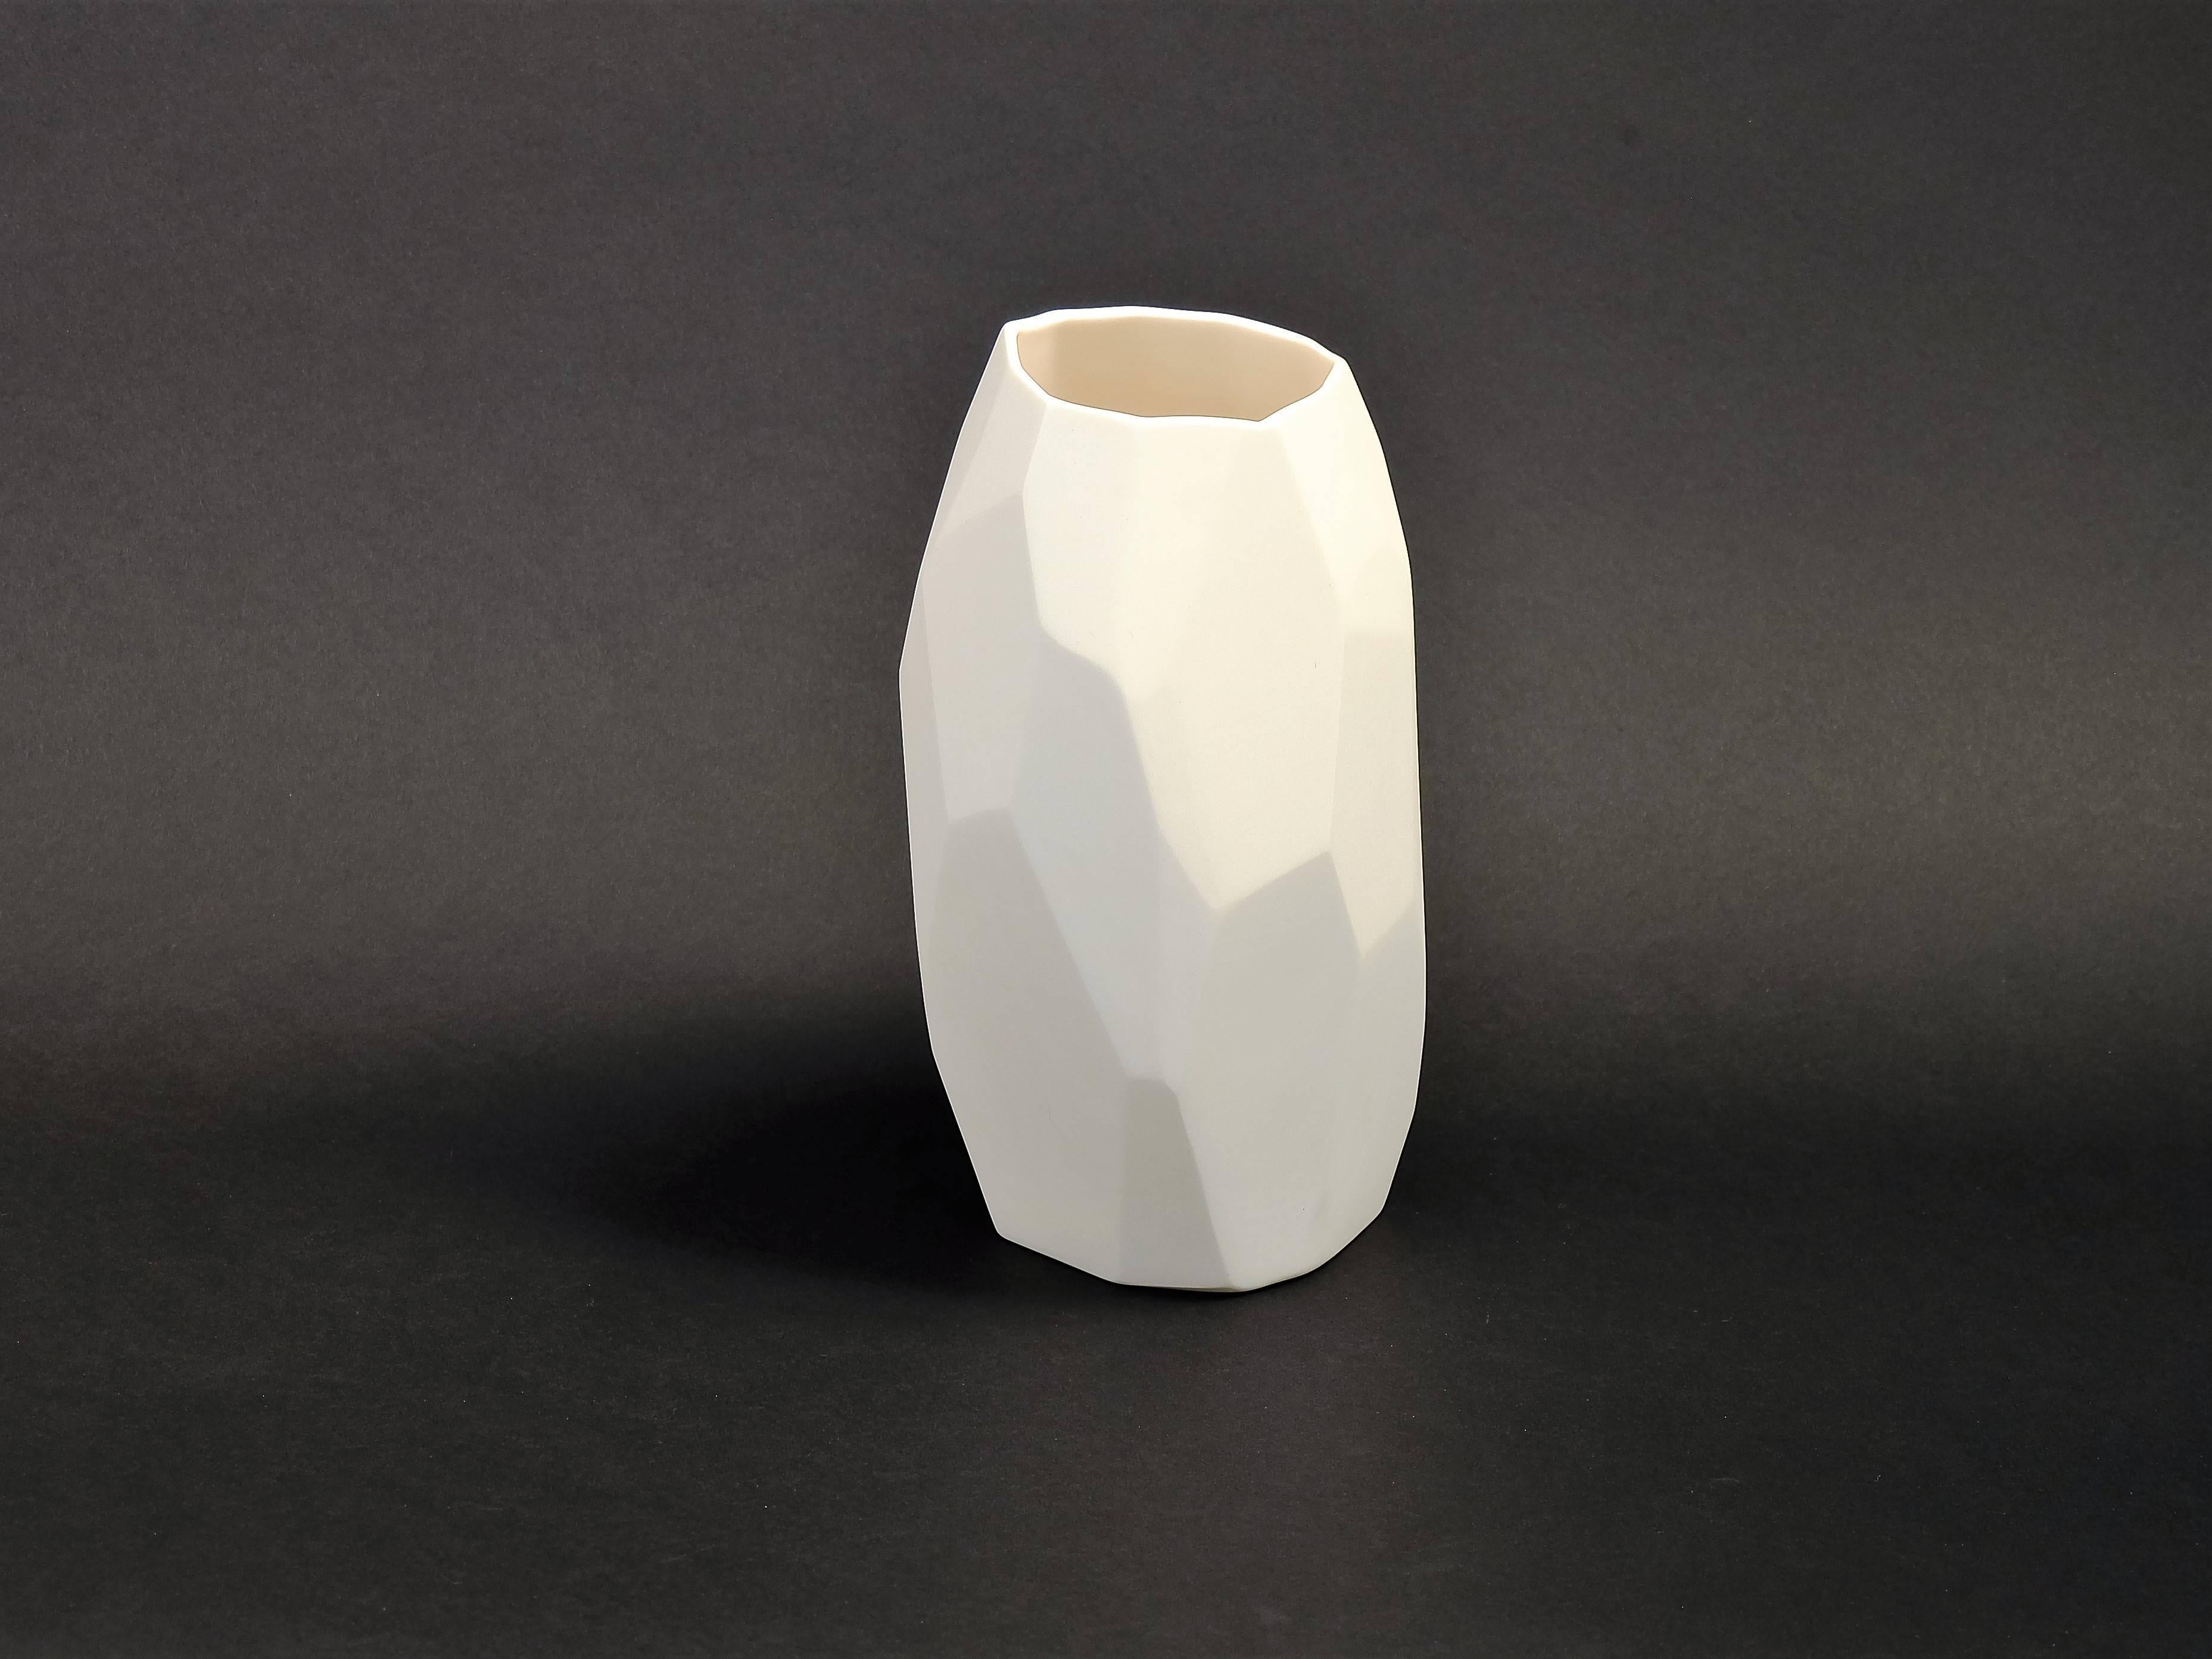 A handmade unglazed (biscuit) porcelain vase made by design duo Vezzini & Chen.

Inspired by rock formation, it is a limited edition of 15 but each one is different because entirely handmade. The surface is hand carved following the faceted form of